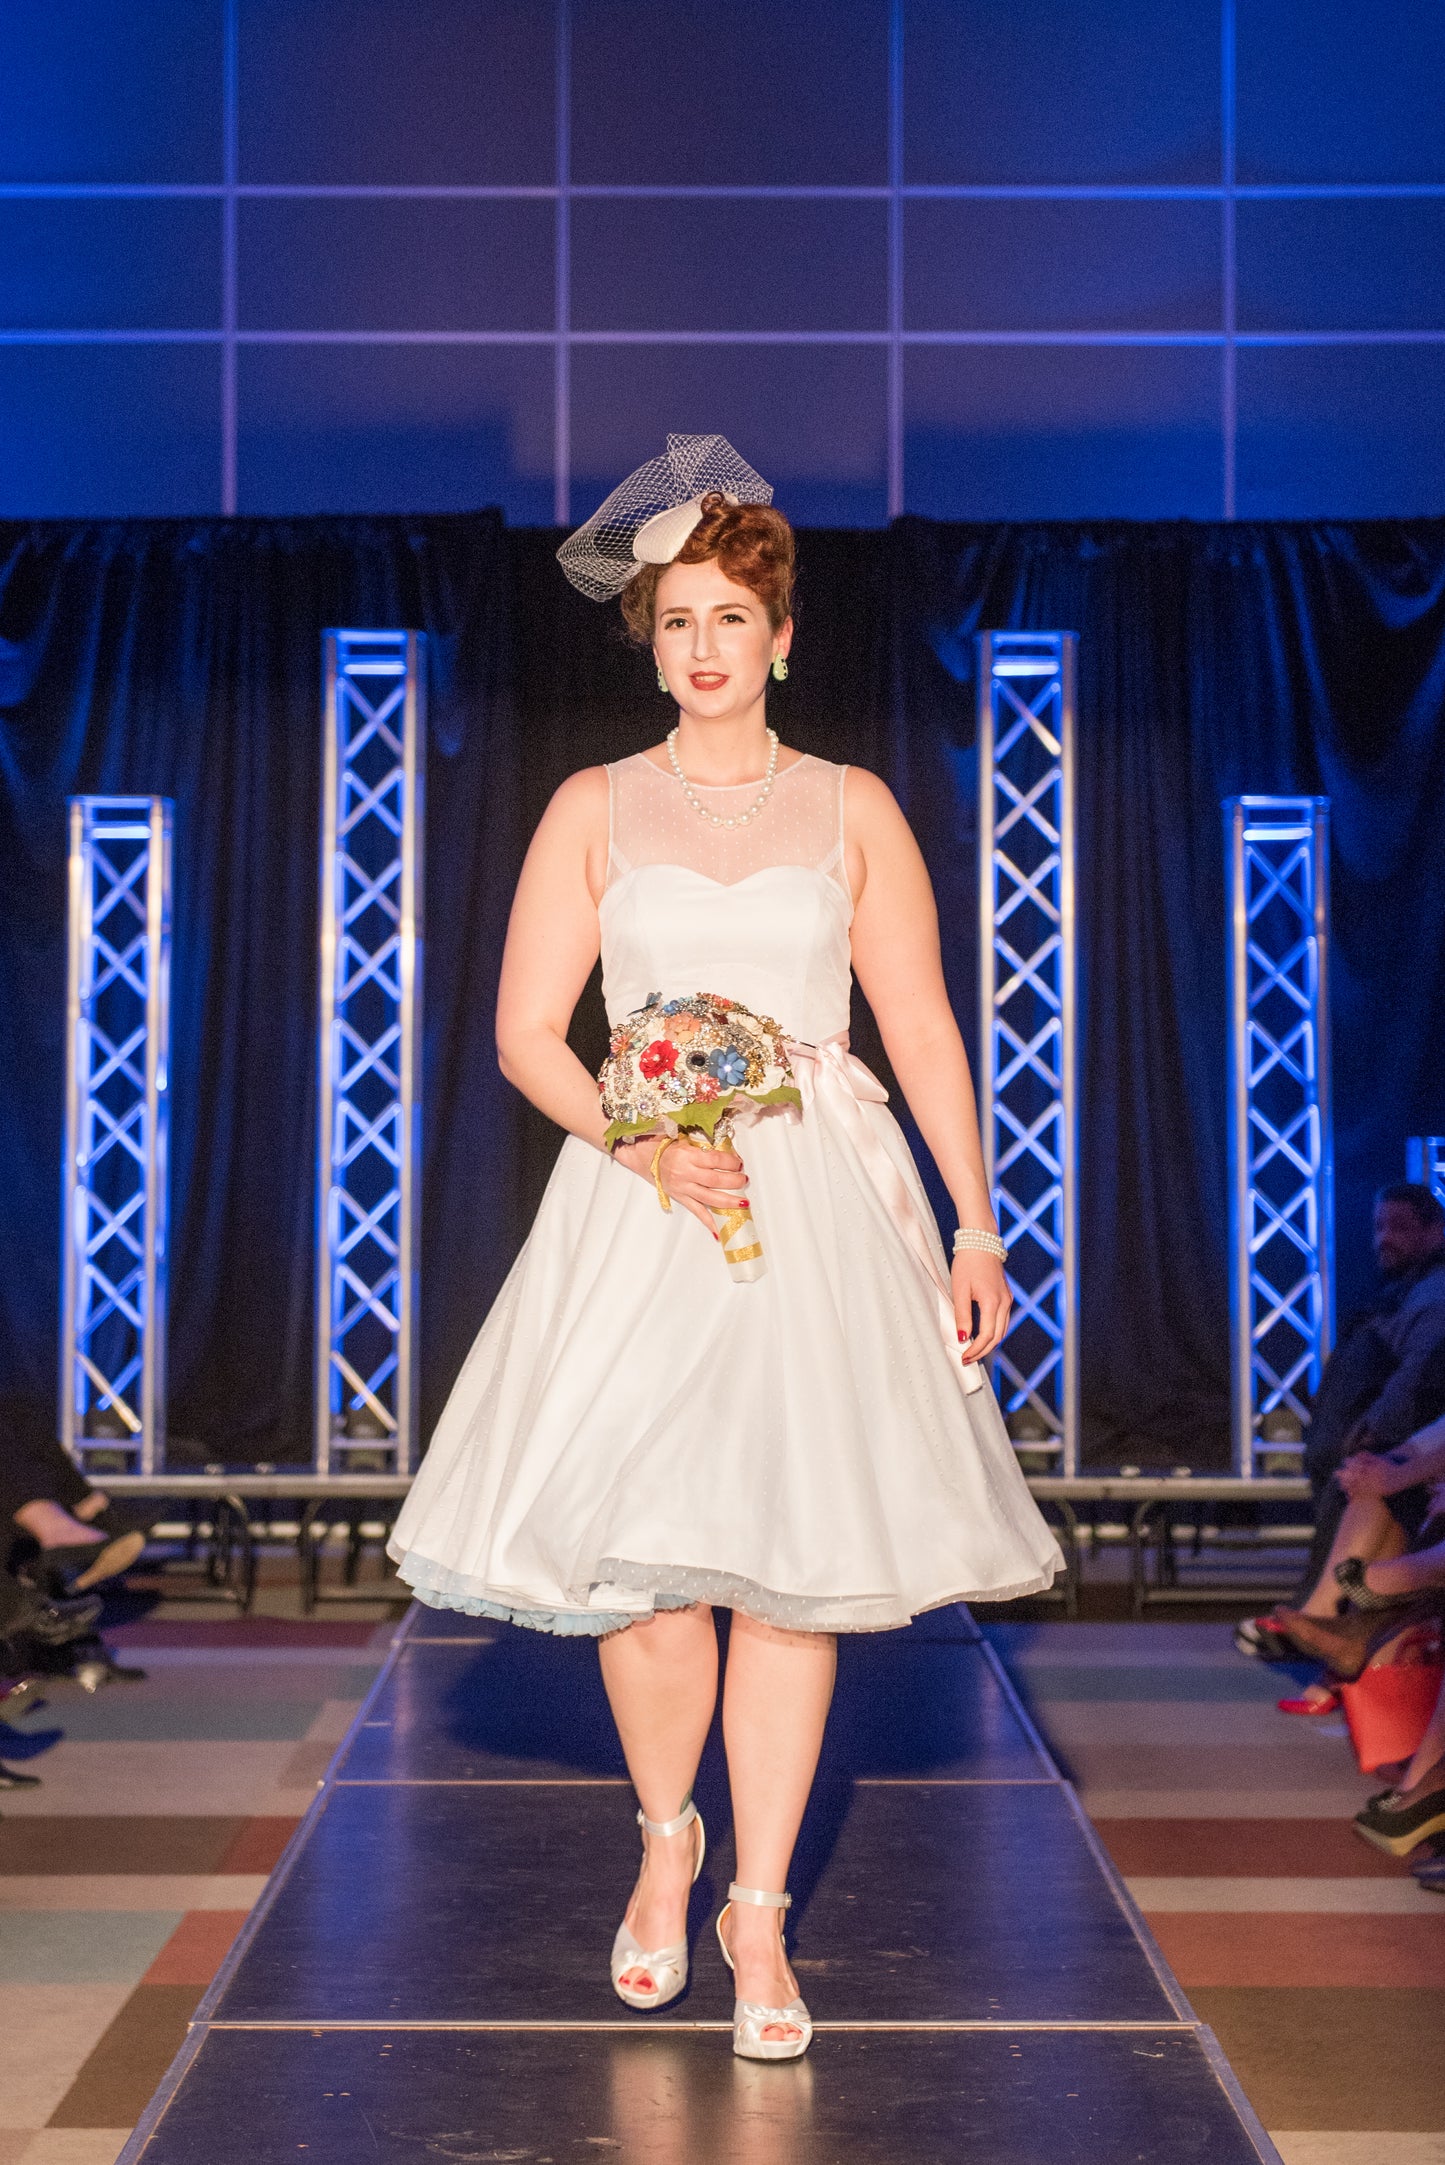 Retro Pinup Wedding Dress by PMdesigns by Pamela Marie